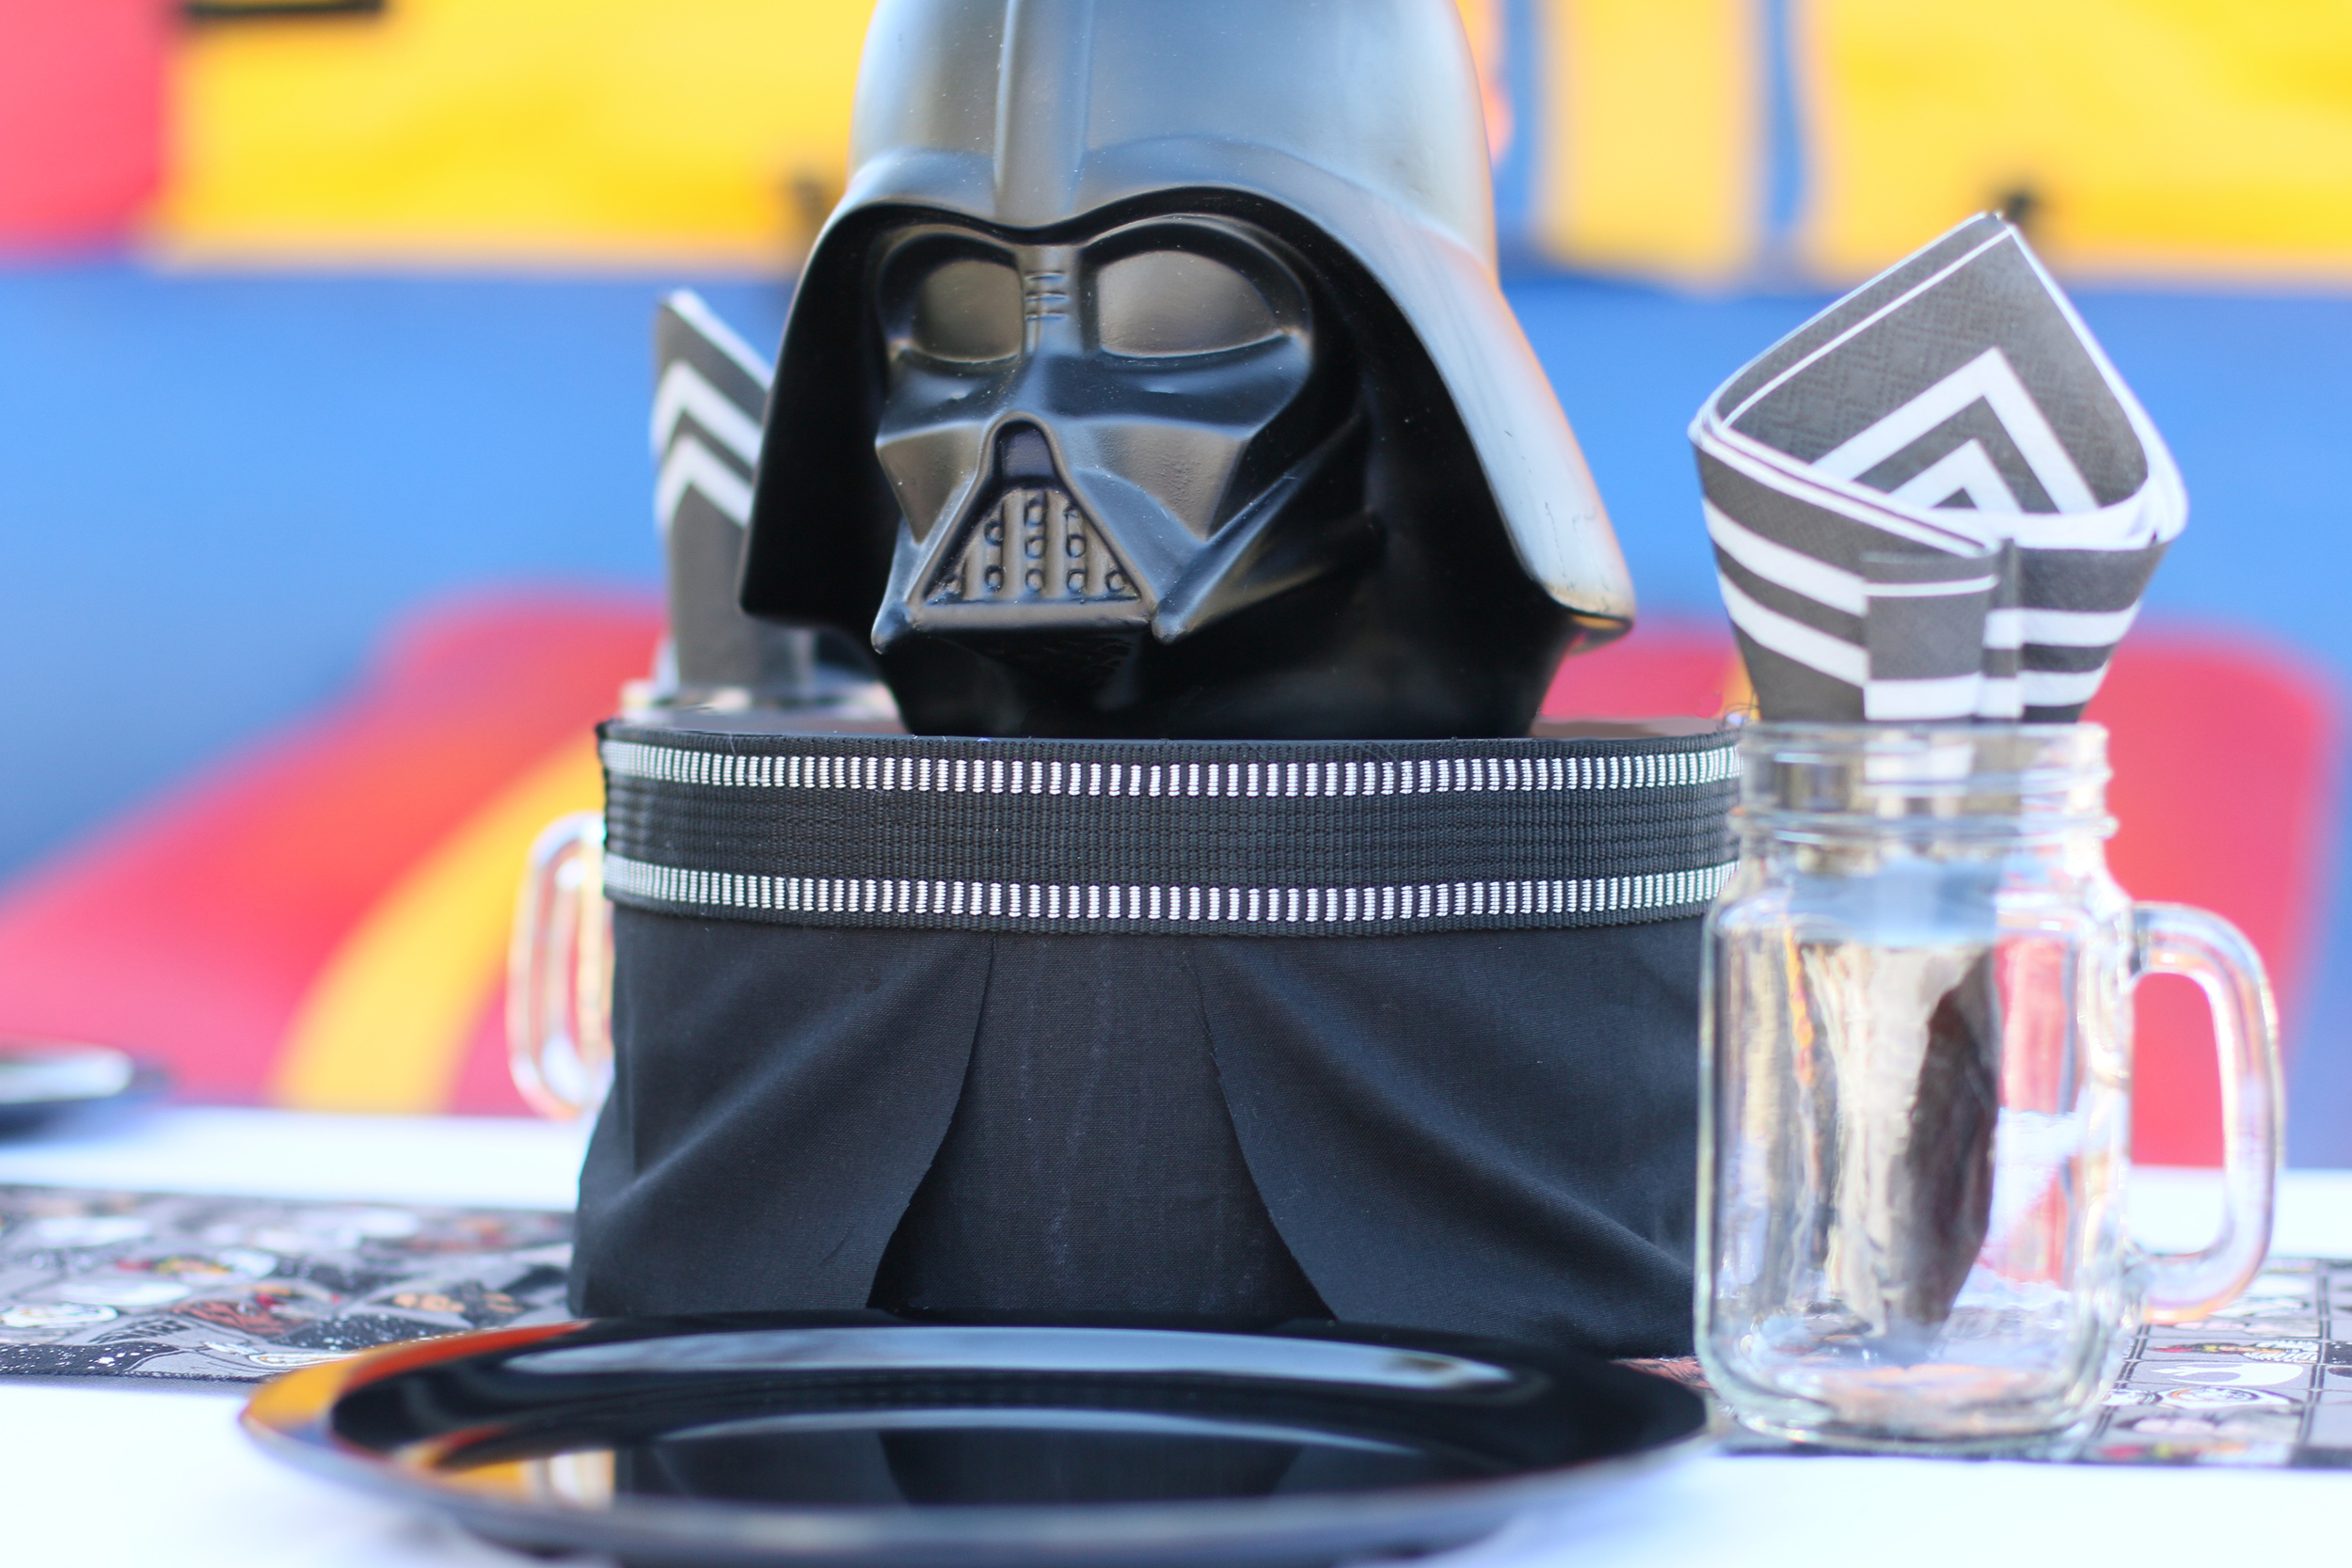 Copy of This Star Wars party rental collection will awaken the force in all party guests! Star Wars action figures, signage, linens, and centerpieces are all included to make your party planning si...